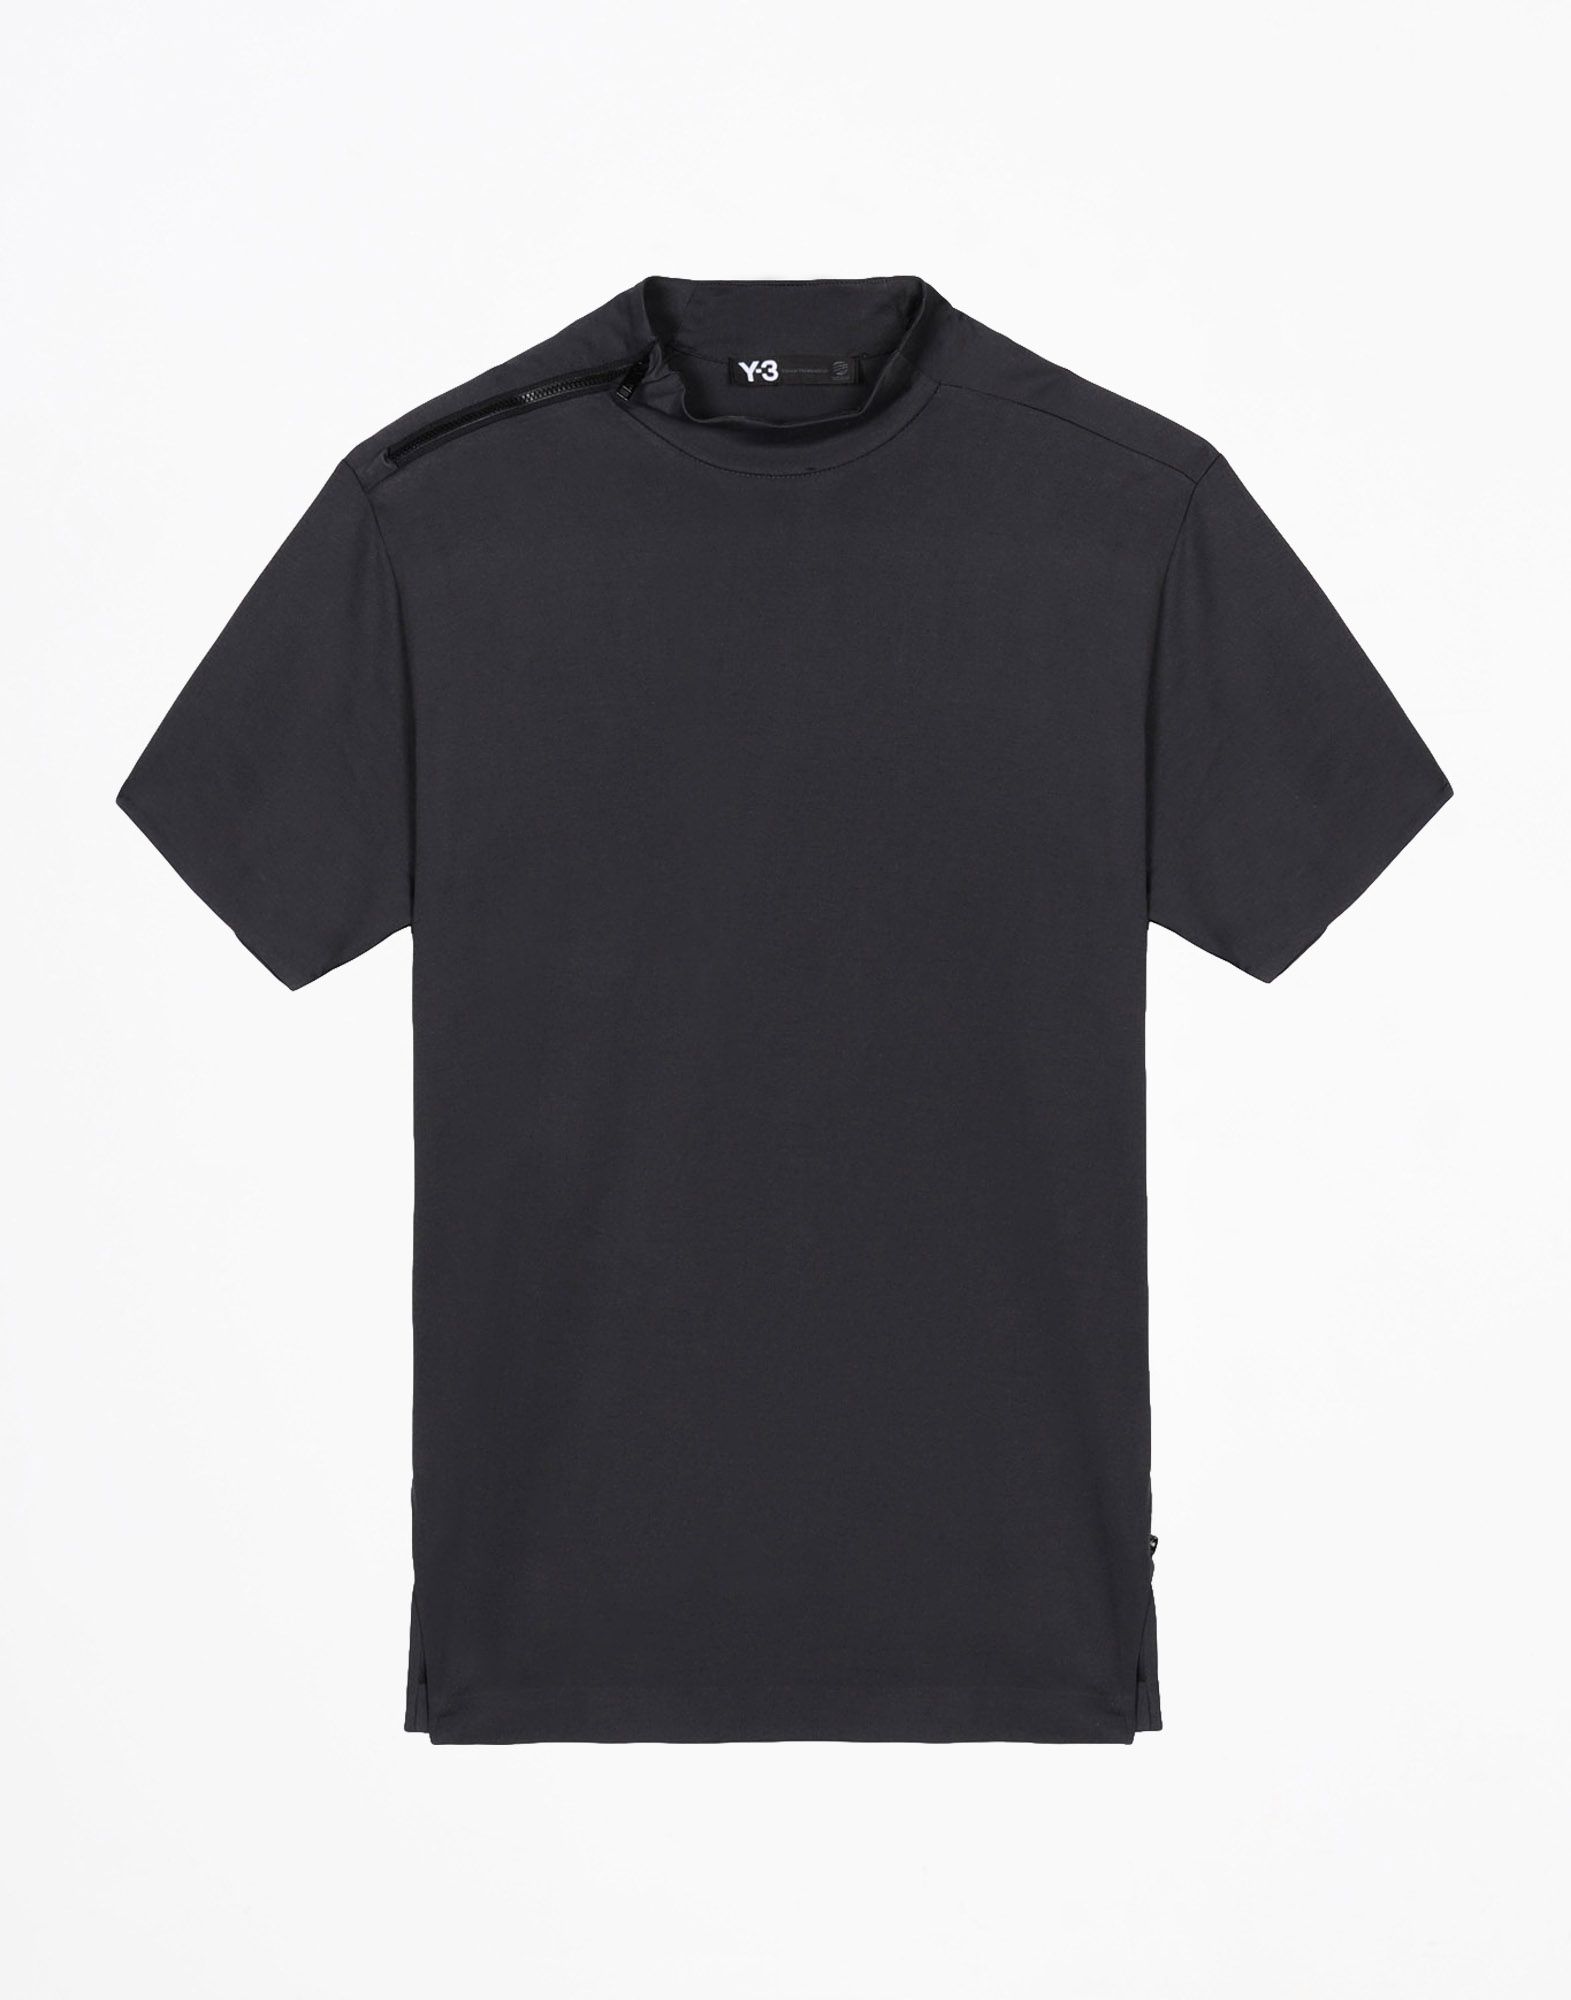 Y 3 ZIP LONG SHIRT ‎ ‎Short Sleeve t Shirts‎ ‎ ‎ | Adidas Y-3 Official Site